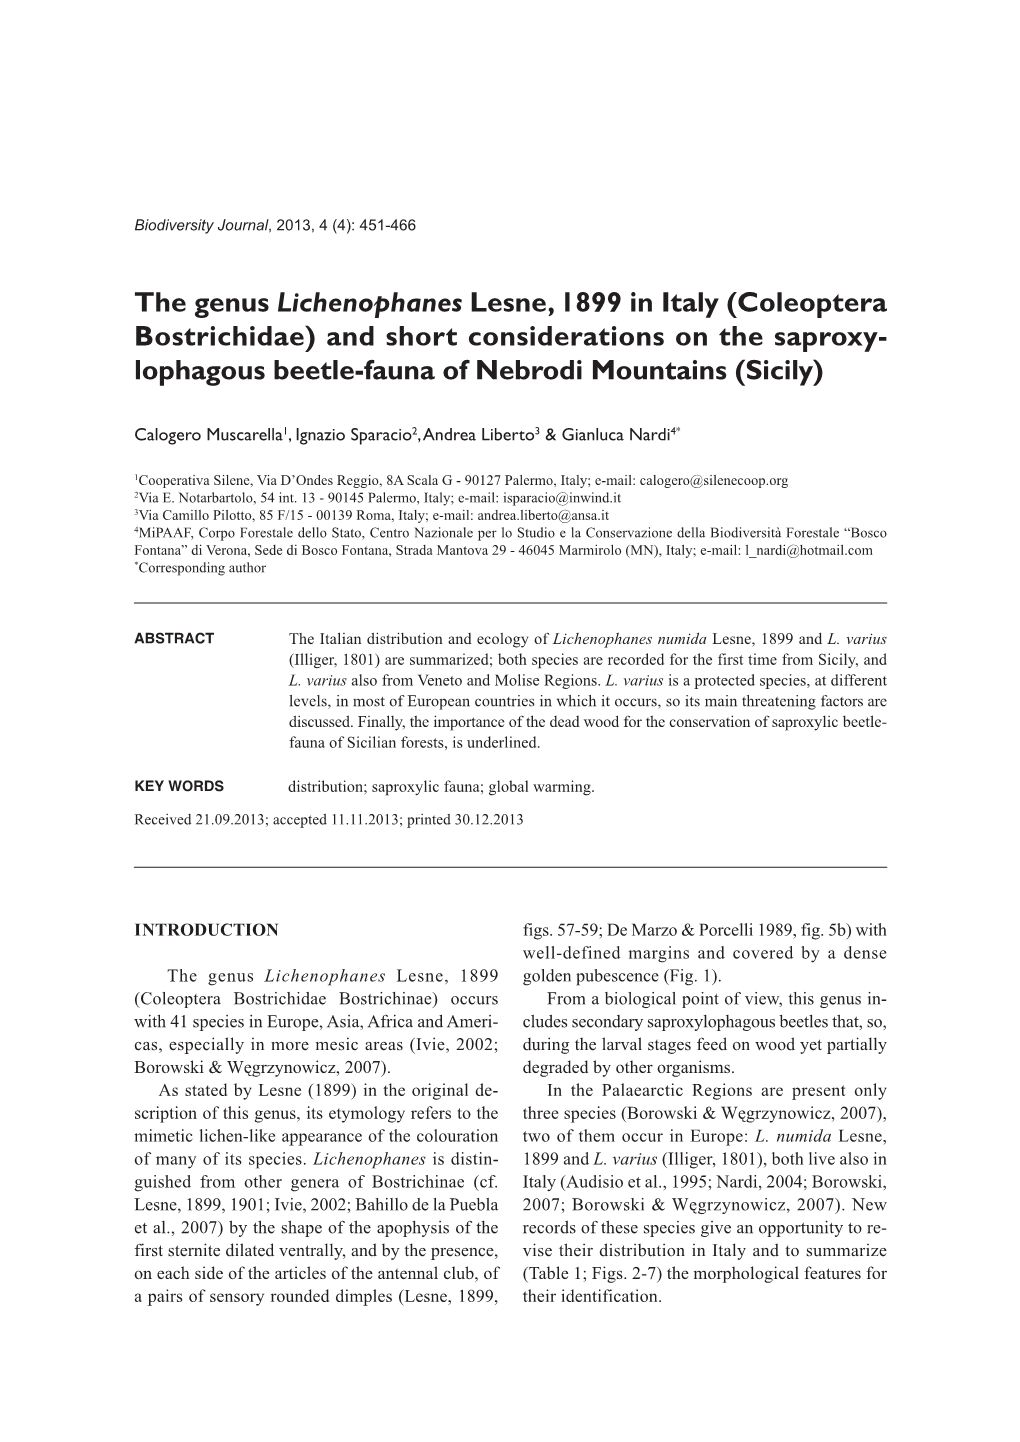 The Genus Lichenophanes Lesne, 1899 in Italy (Coleoptera Bostrichidae) and Short Considerations on the Saproxy - Lophagous Beetle-Fauna of Nebrodi Mountains (Sicily)